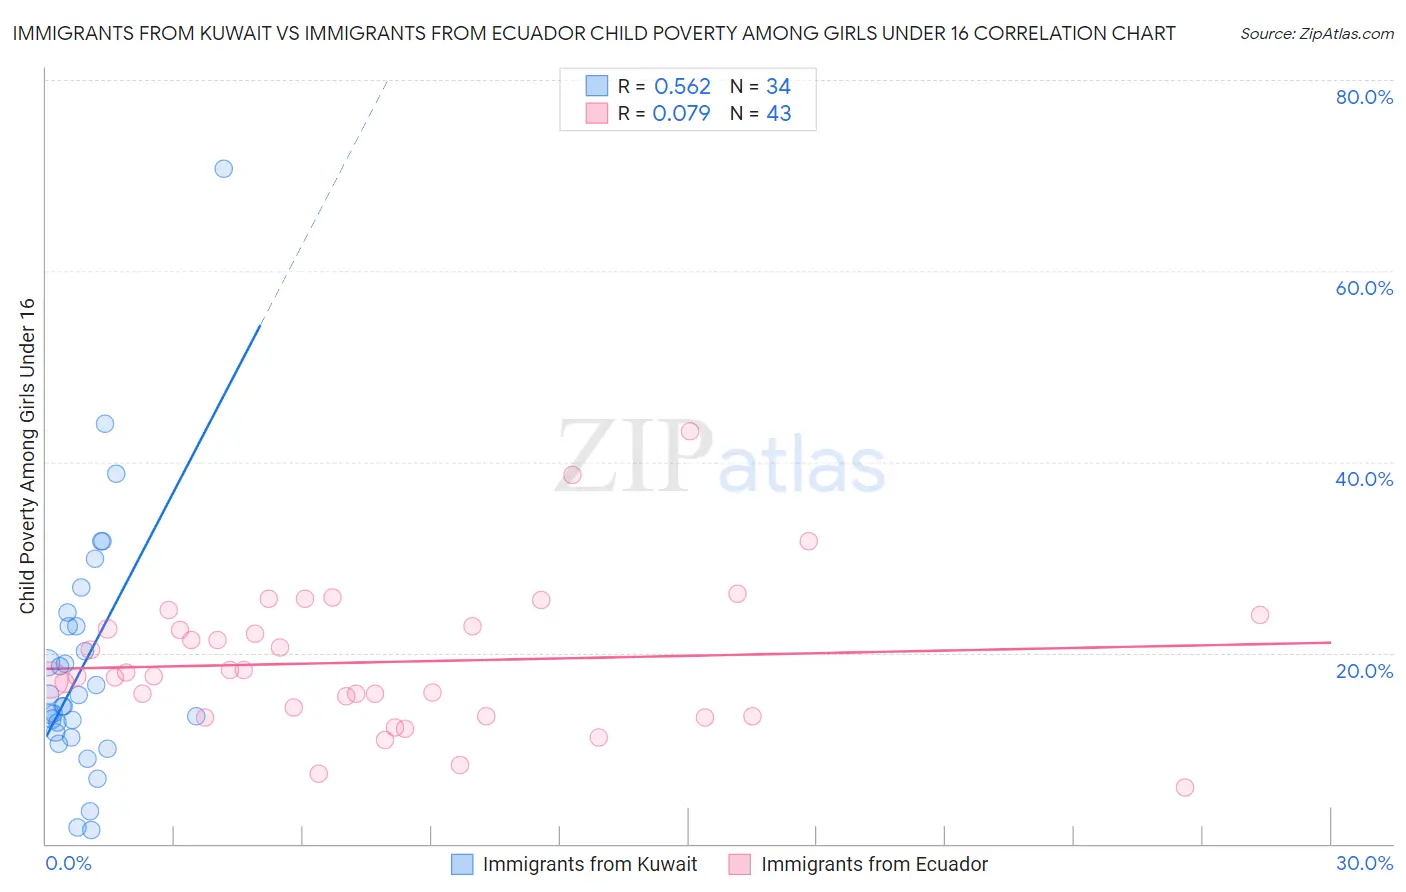 Immigrants from Kuwait vs Immigrants from Ecuador Child Poverty Among Girls Under 16